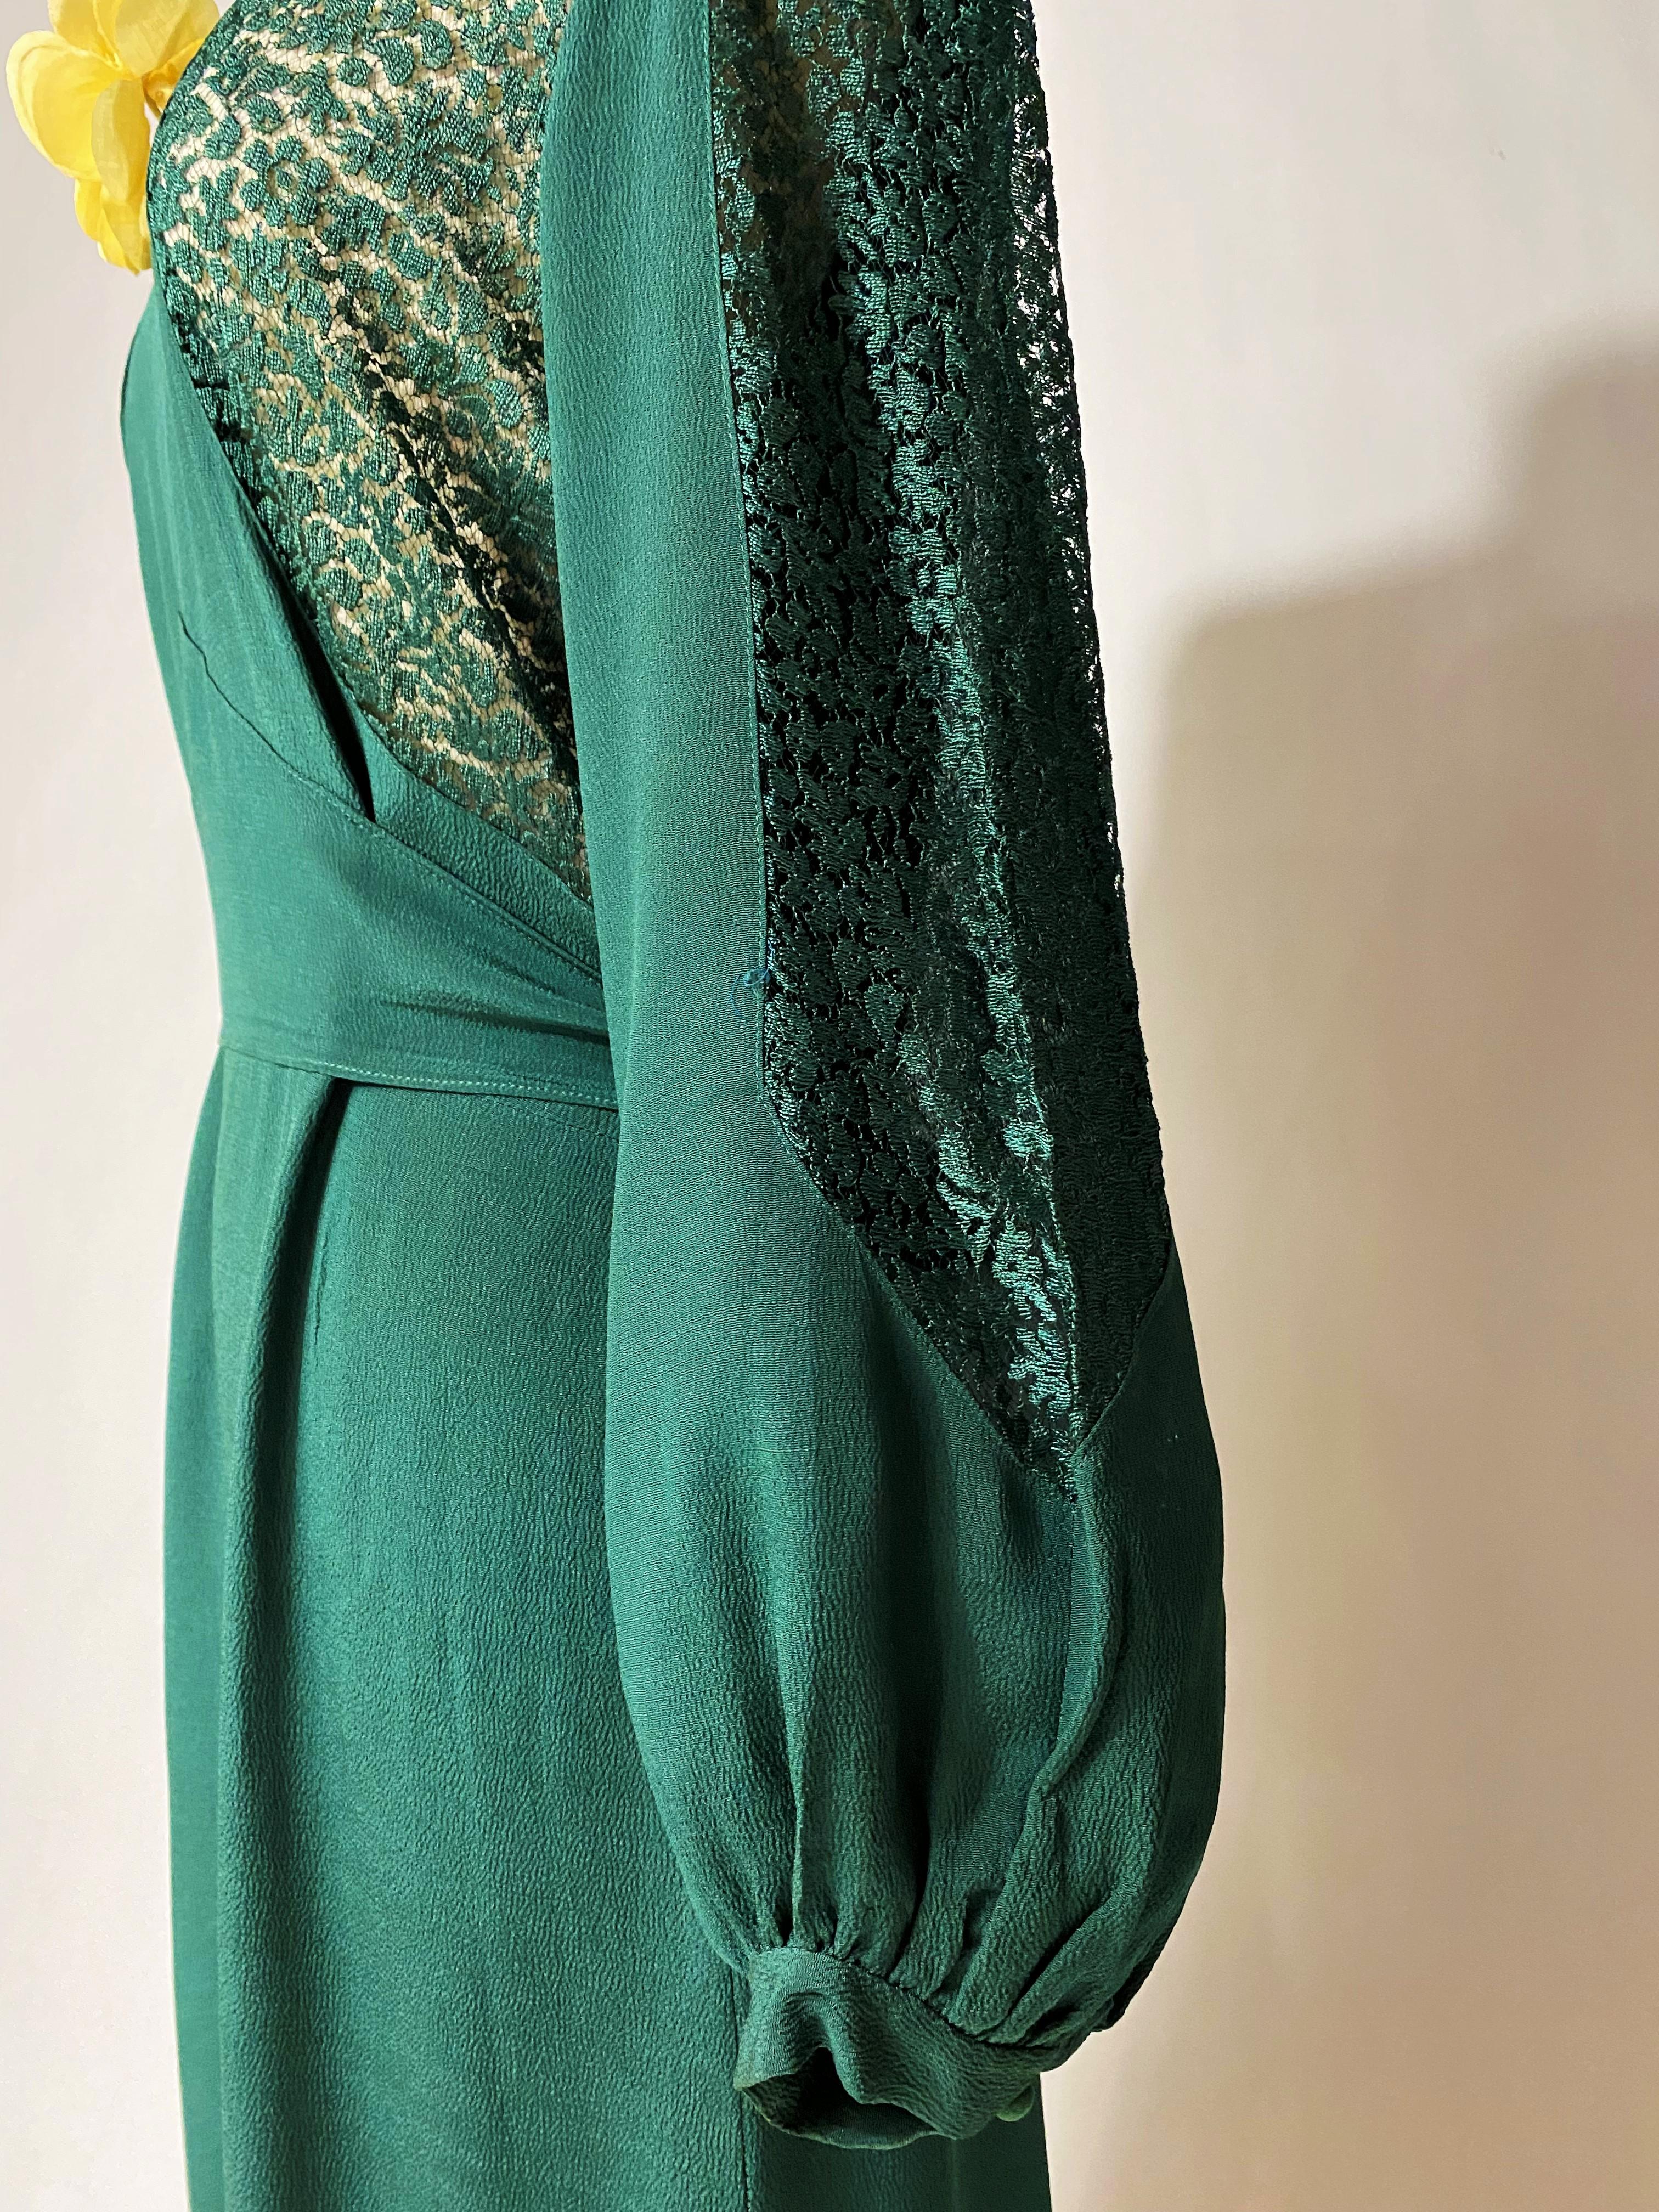 An Emerald green crepe and lace evening dress- France Circa 1940 For Sale 5